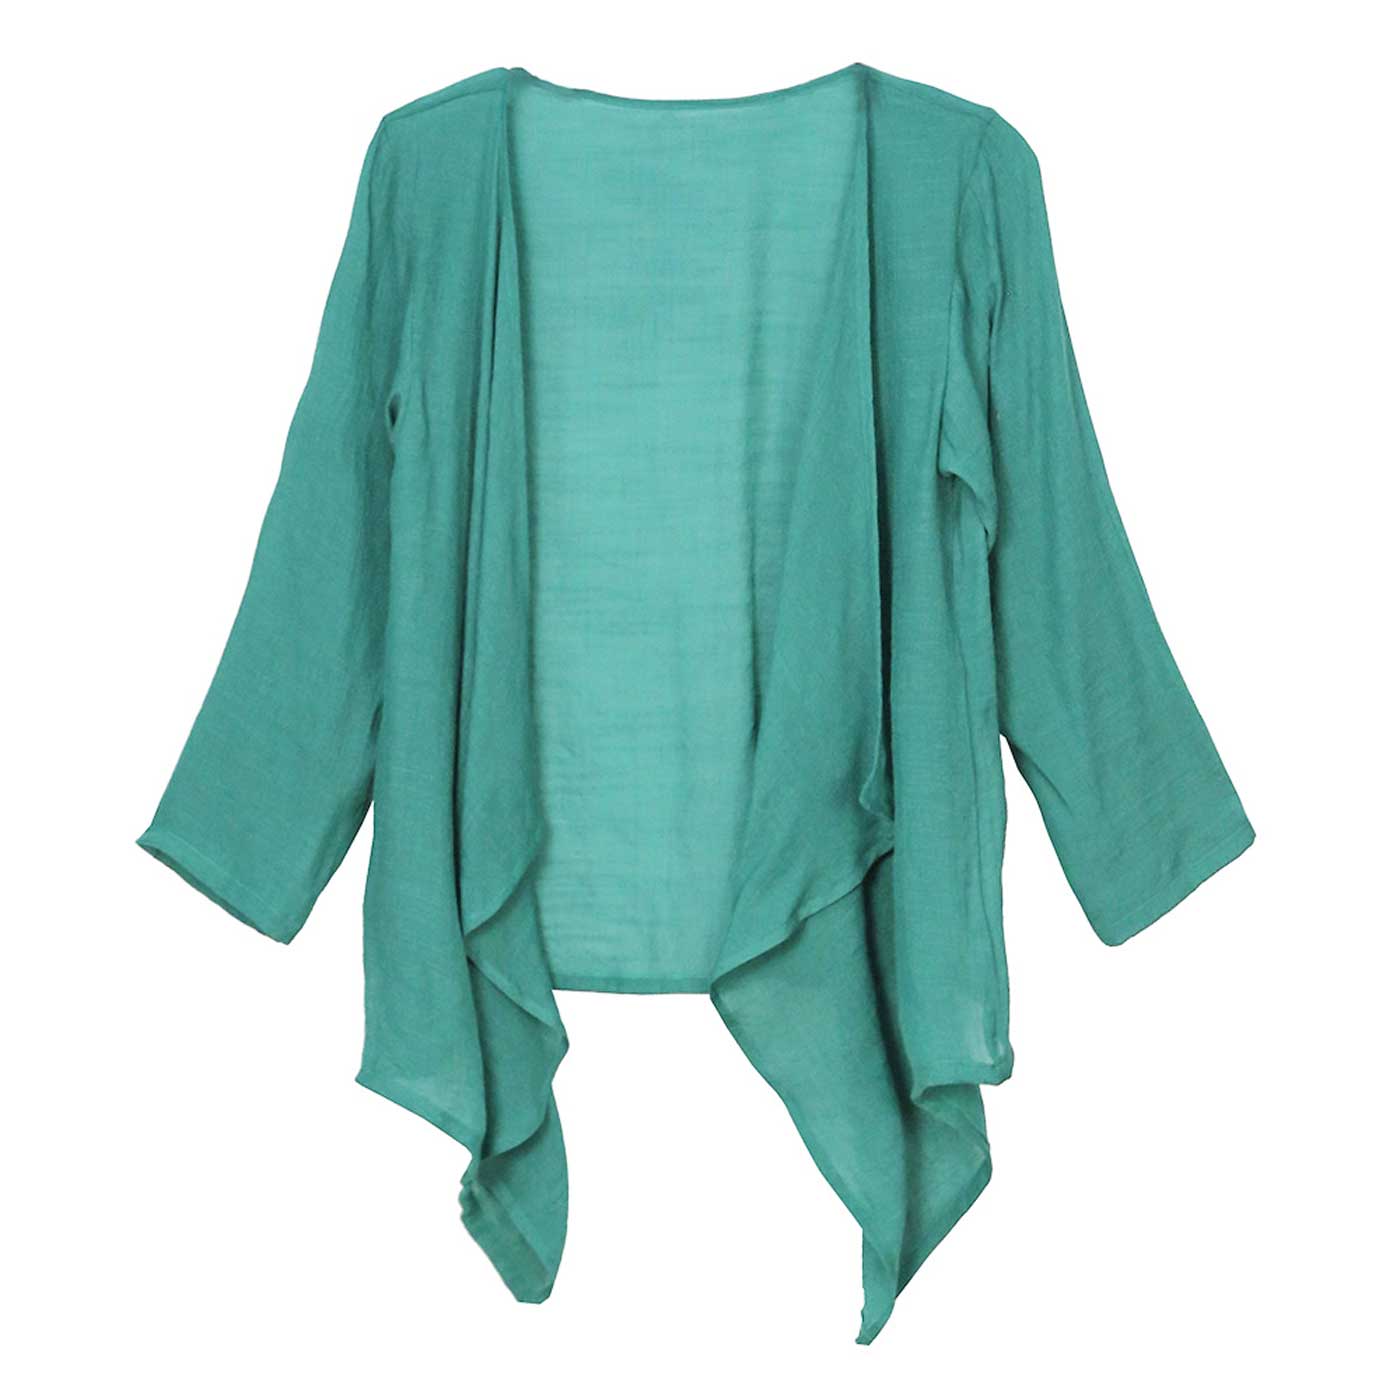 Green Front Tie Short Cardigan,  This Summer Cardigans are Made of high-quality material which is very soft and breathable for Women.  The added short edge gives better coverage with a feminine look. Front Tie Short Kimono suitable to wear with Jeans, Shorts, T-shirt, Midi Skirt and Dresses! Perfect for Vacation, Office, Home, Evening Party Spring, Summer and Fall.